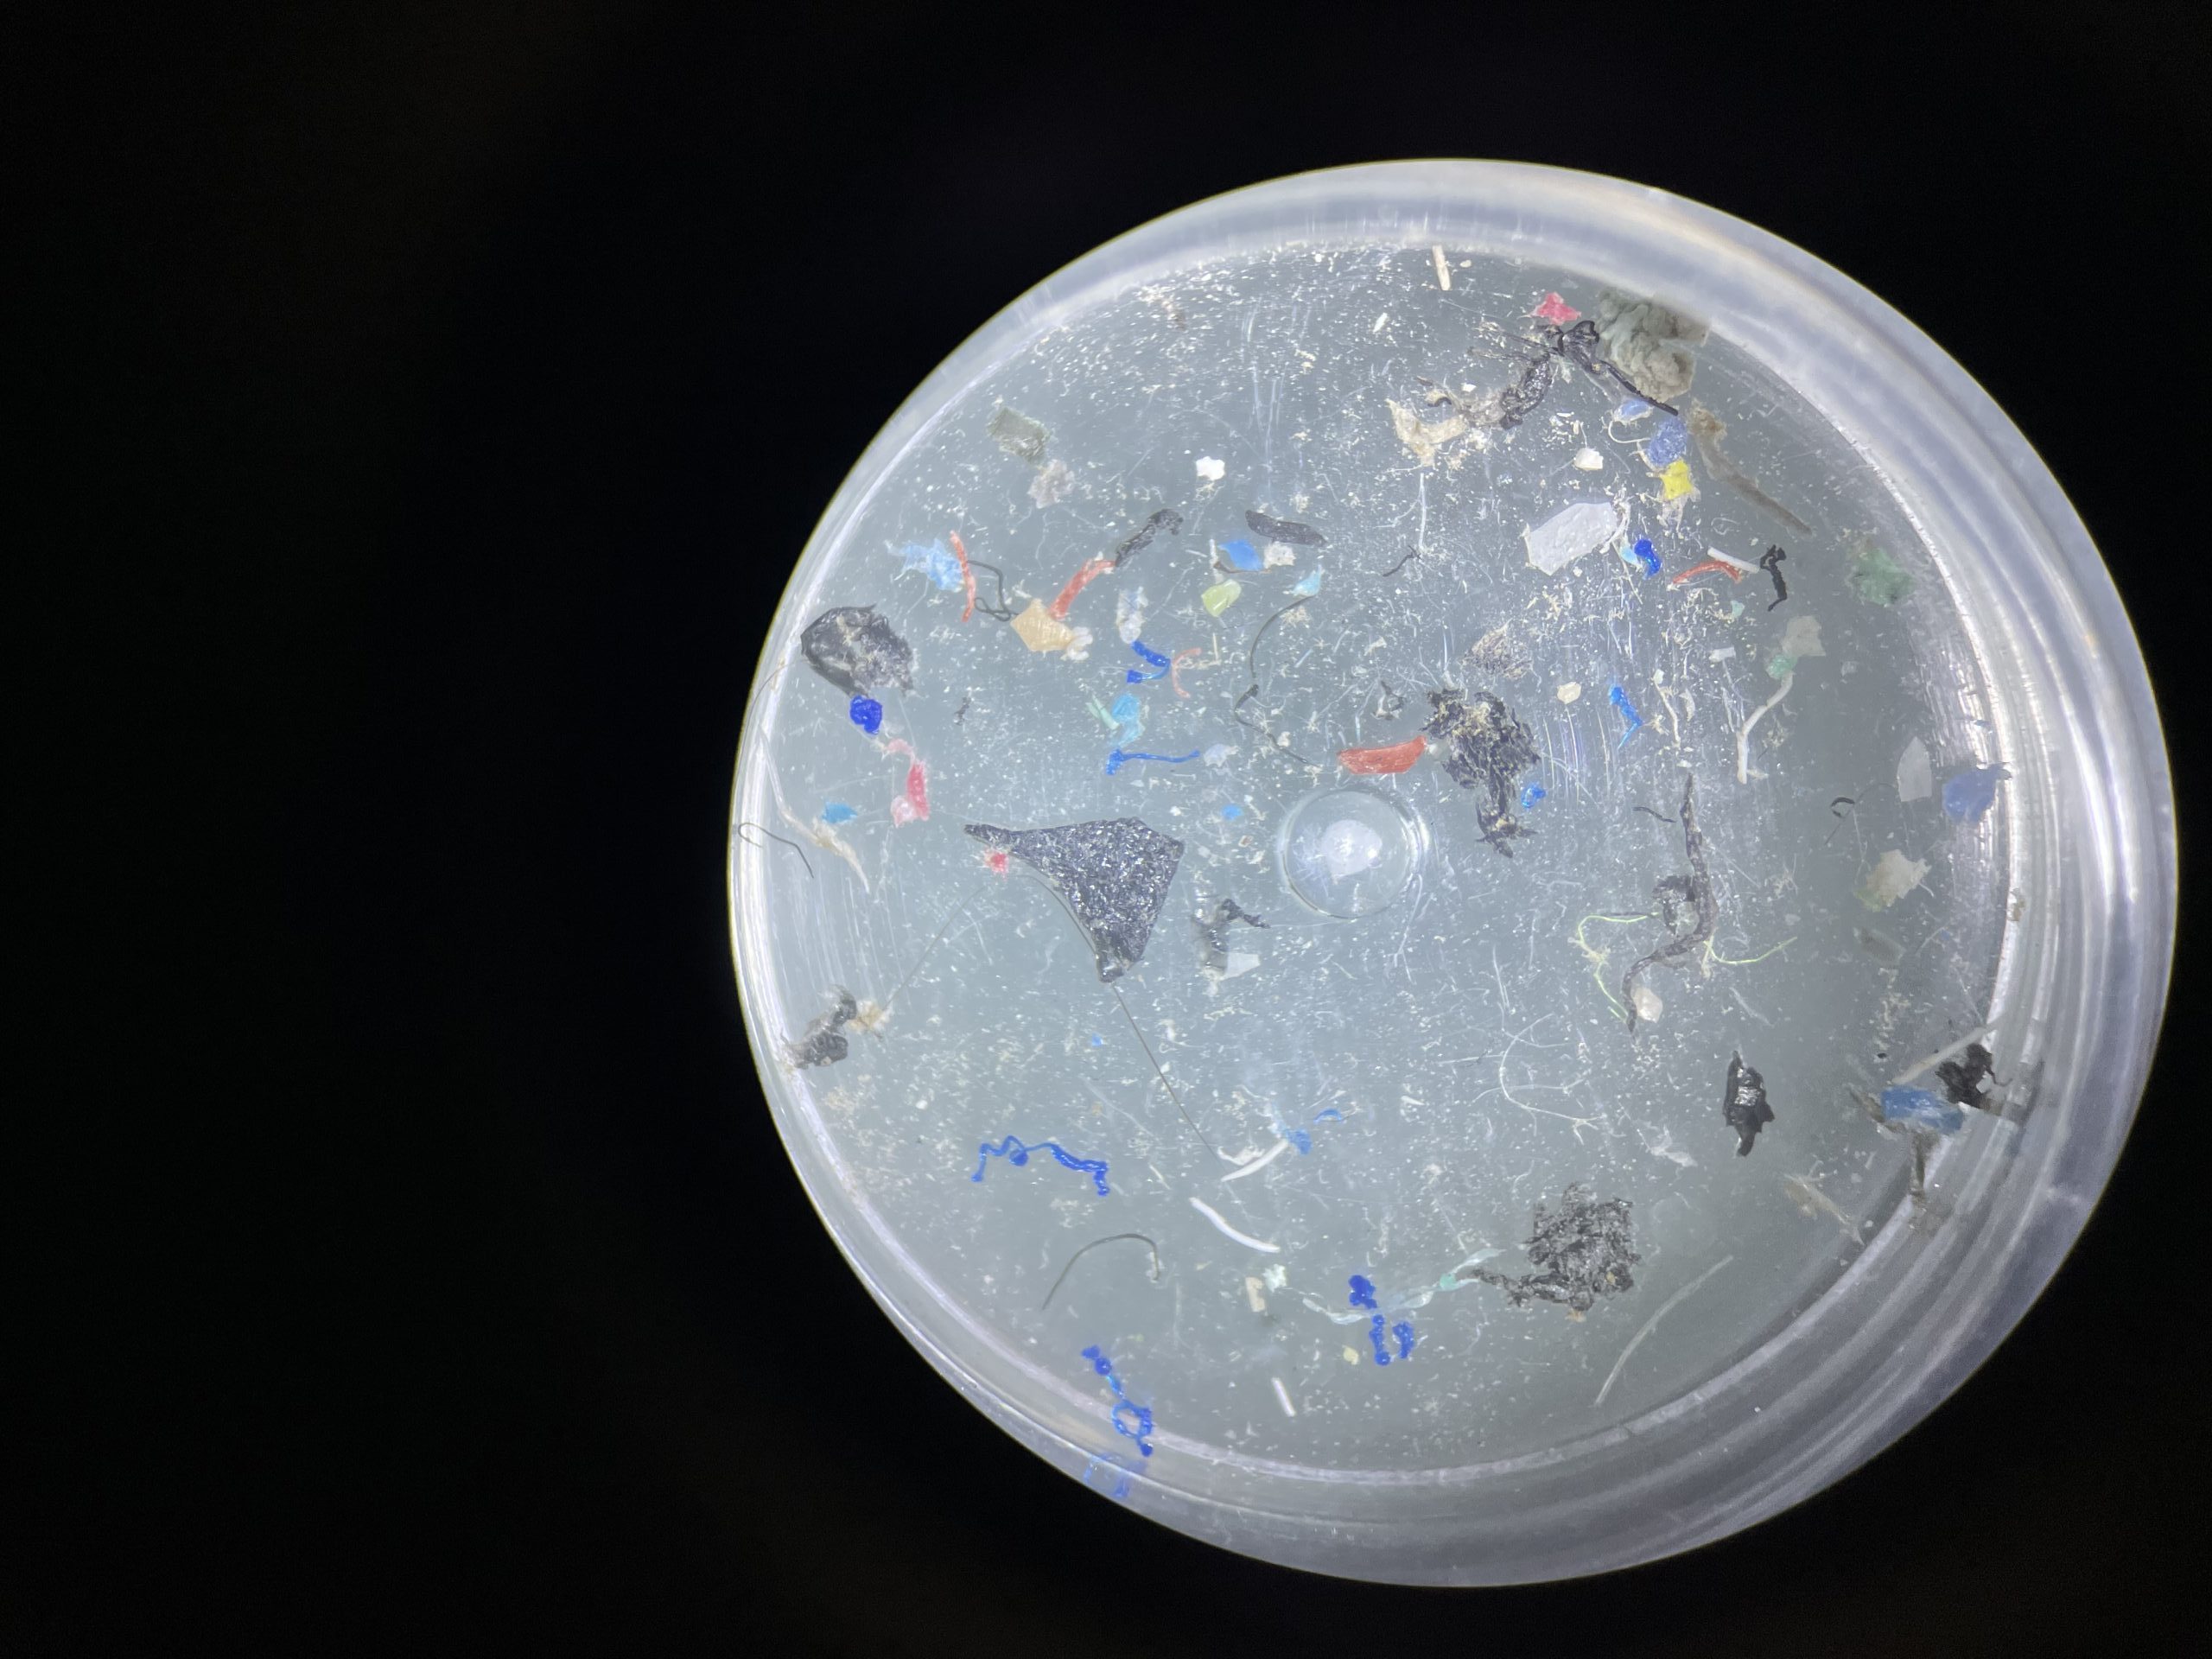 Close-up of debris particles floating in a water sample. Particles are blue, orange, red, white and black.